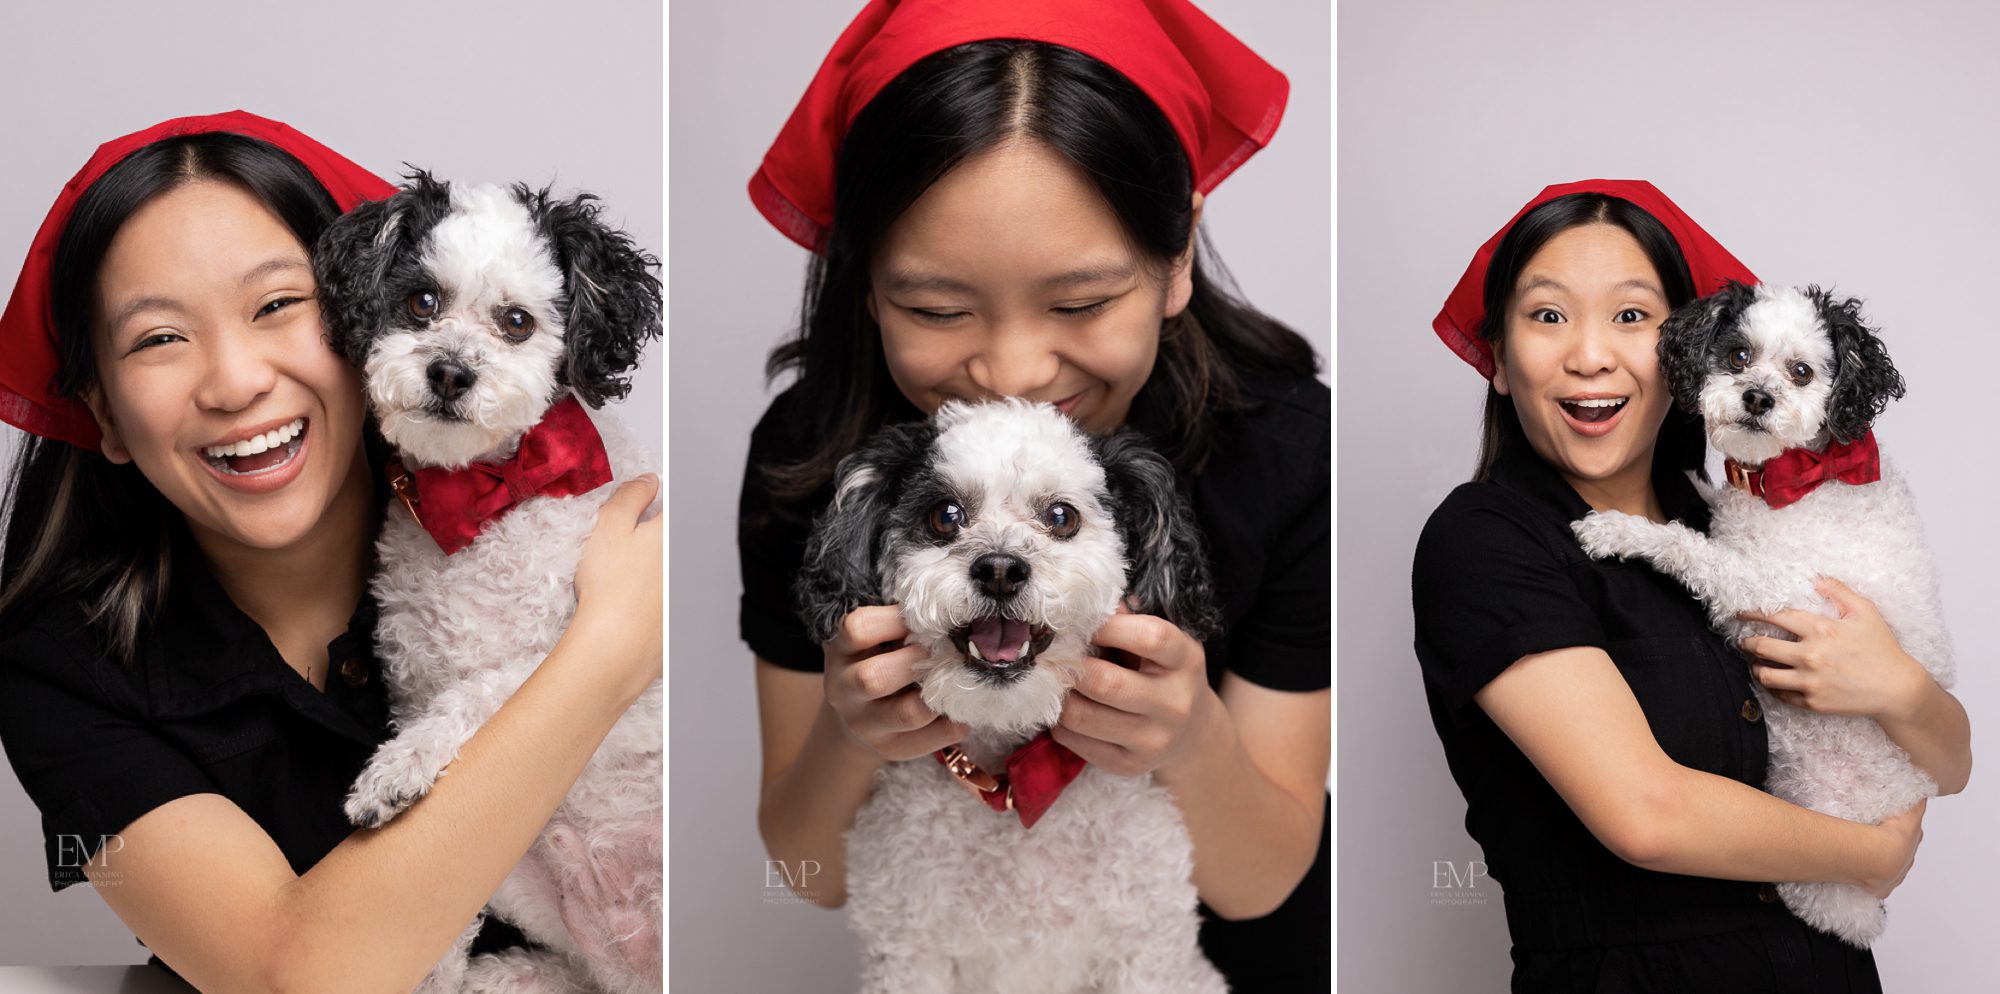 Adoarable high school senior girl with poodle in studio.